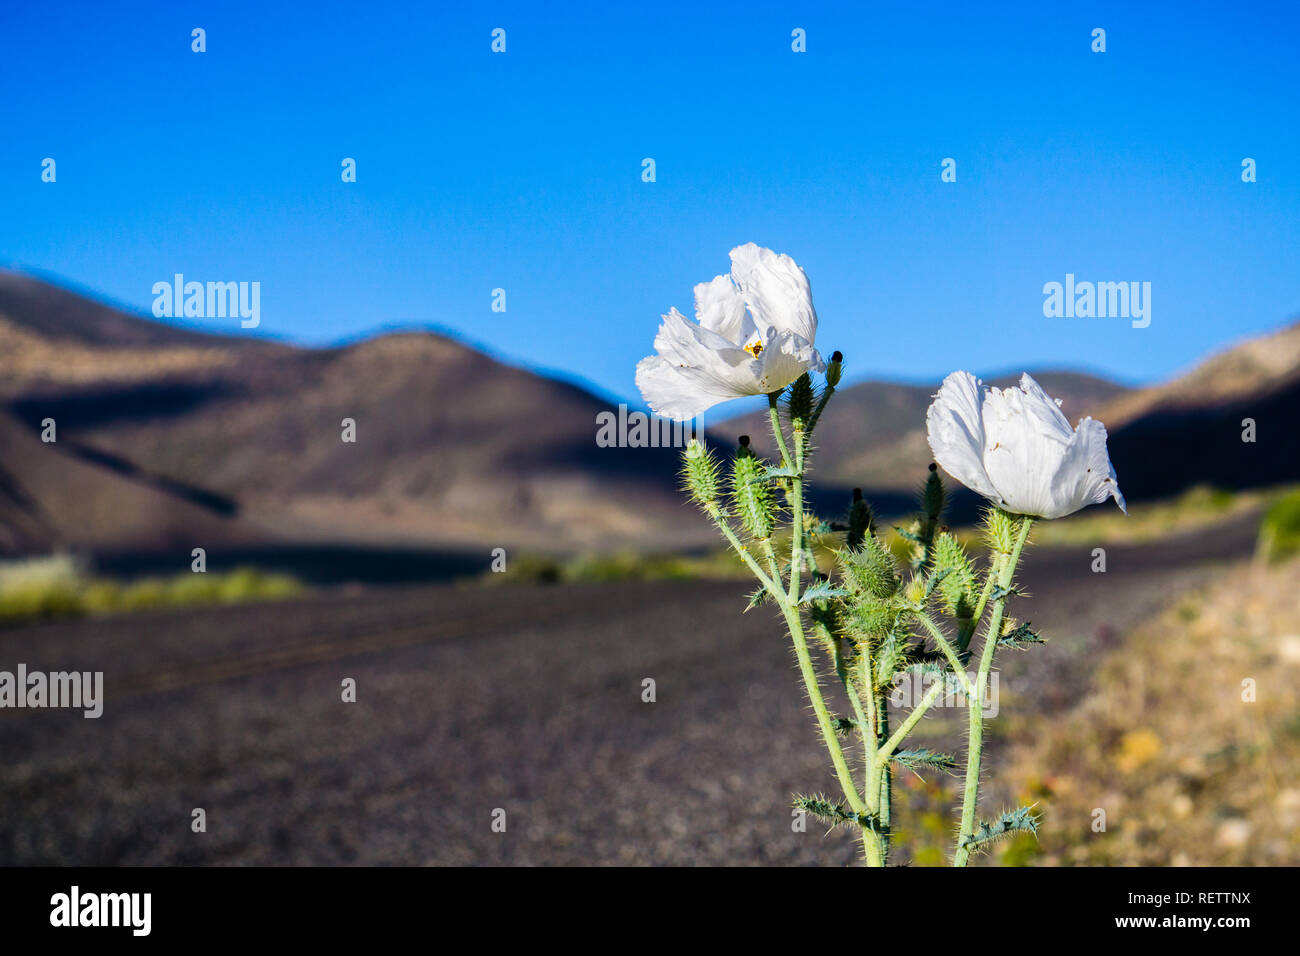 Prickly Poppy (Argemone munita) growing on the side of the road in the mountains of Death Valley, California Stock Photo